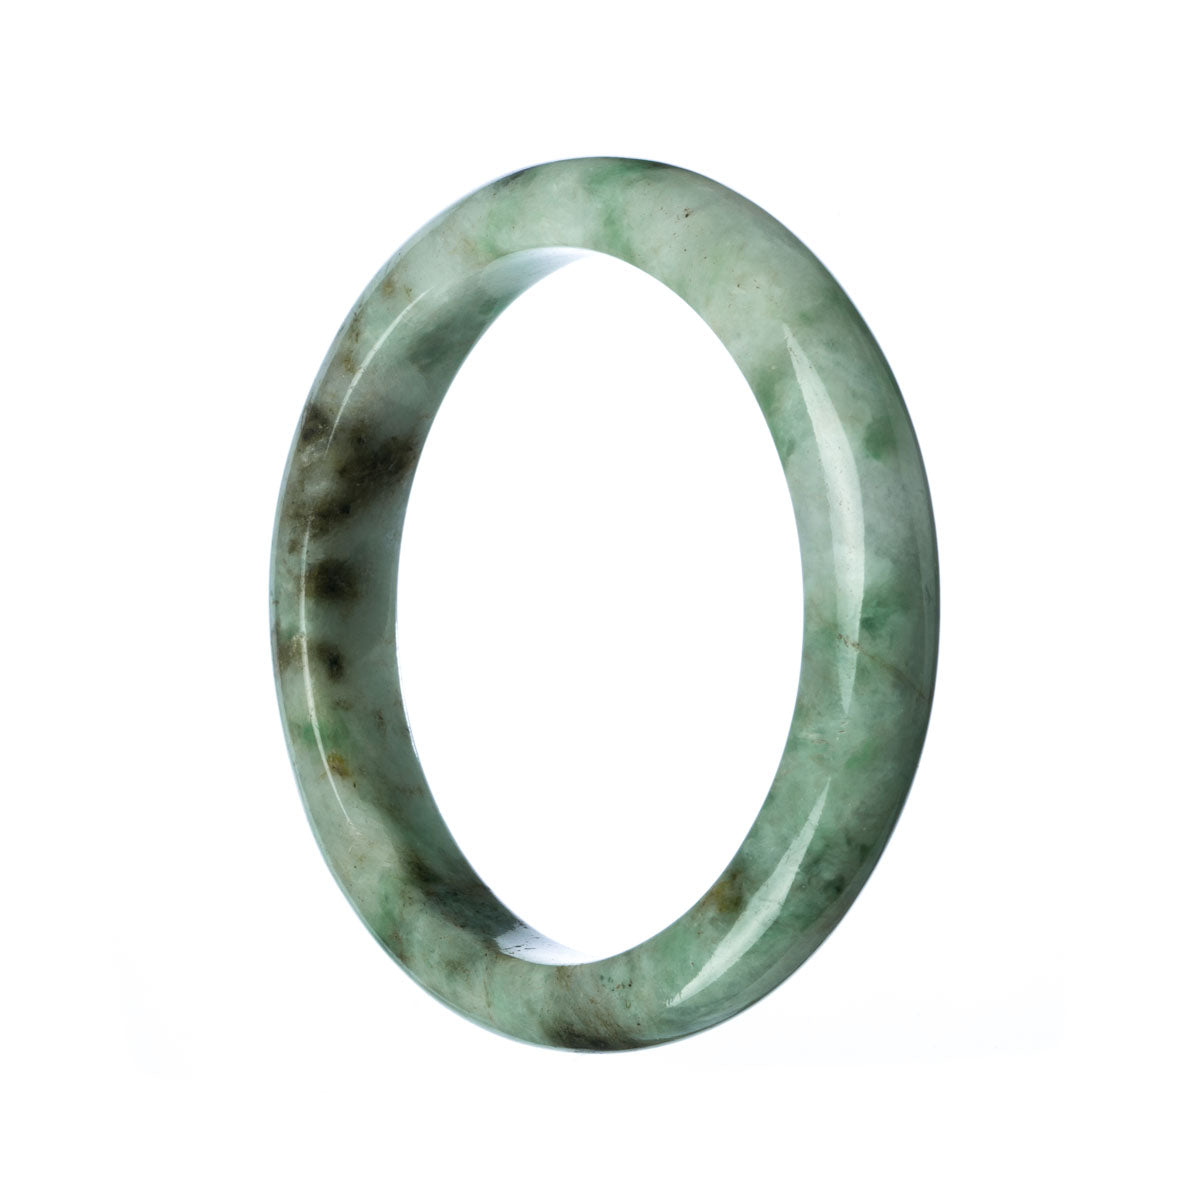 A close-up image of a green Burma Jade bracelet, featuring a semi-round shape and a certification label. The bracelet is crafted from untreated jade, showcasing its natural beauty.